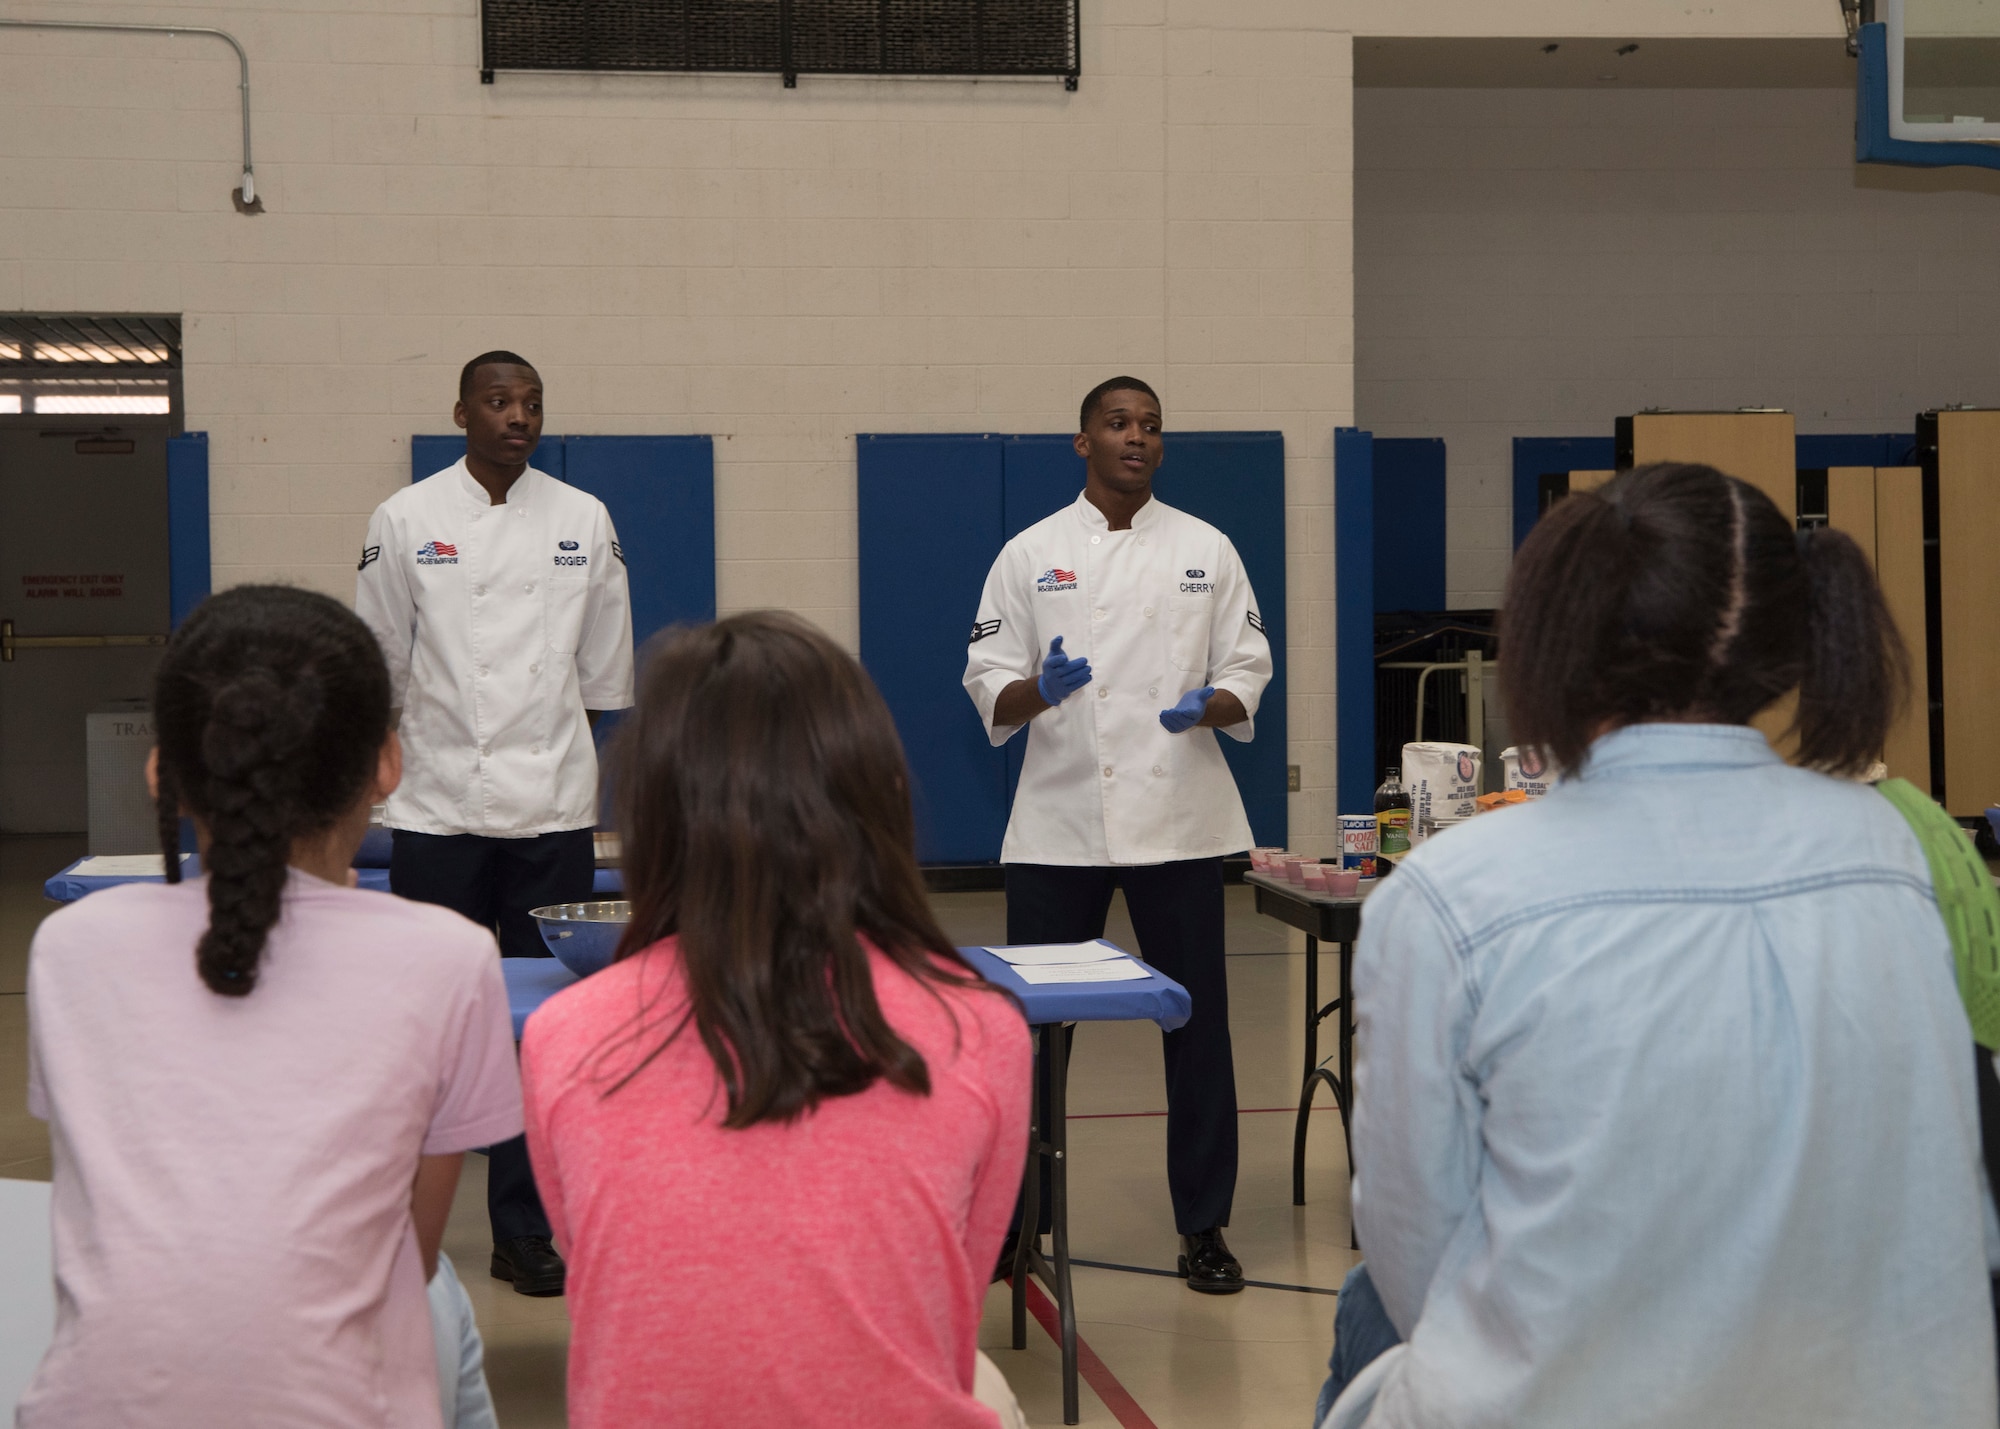 (From left to right) Airman 1st Class Dominick Bogier, 49th Force Support Squadron food service apprentice and Airman 1st Class Malik Cherry, 49th FSS food service specialist, brief youth baking competition teams on the challenge, Jan. 30, 2019, on Holloman Air Force Base, N.M. Five teams from the Youth and Teen Center participated in a cookie baking challenge to win golden spatulas. (U.S. Air Force photo by Airman Autumn Vogt)